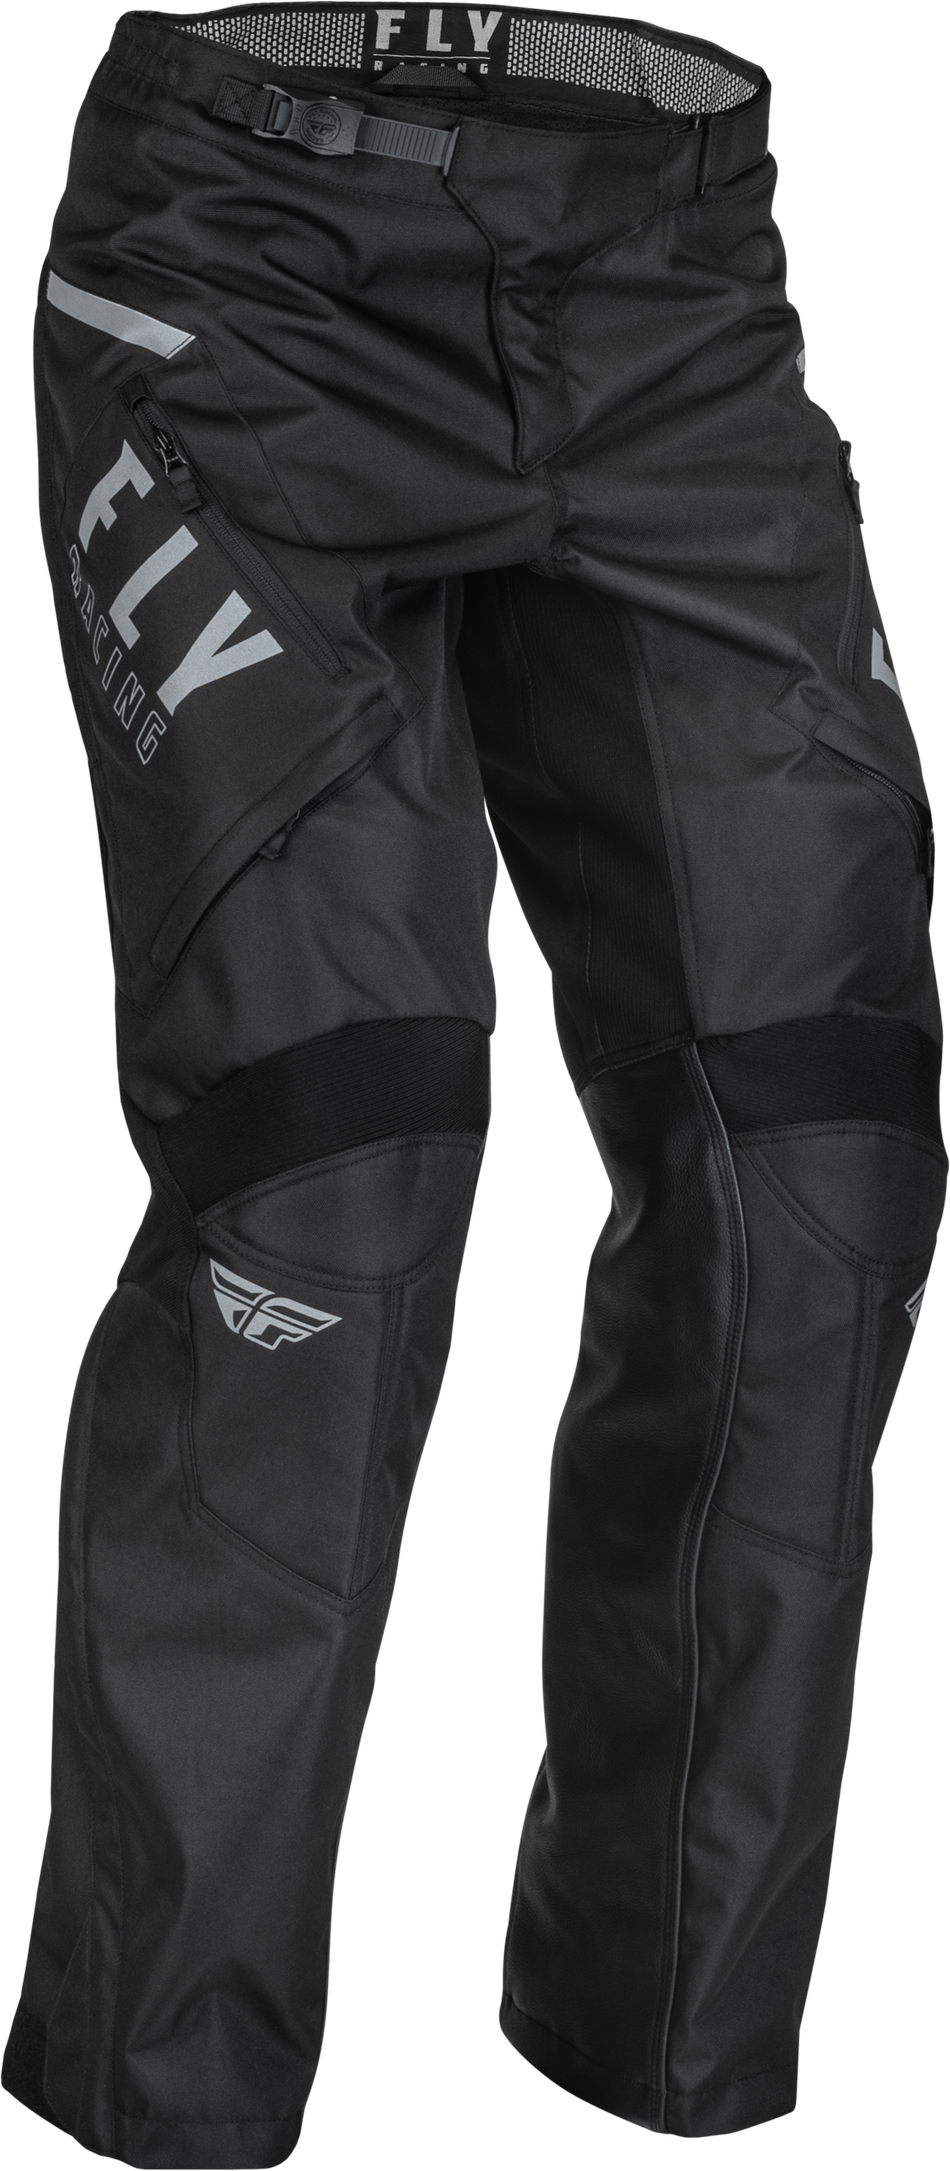 FLY RACING Patrol Over-Boot Pants Black/White Sz 44 376-64044